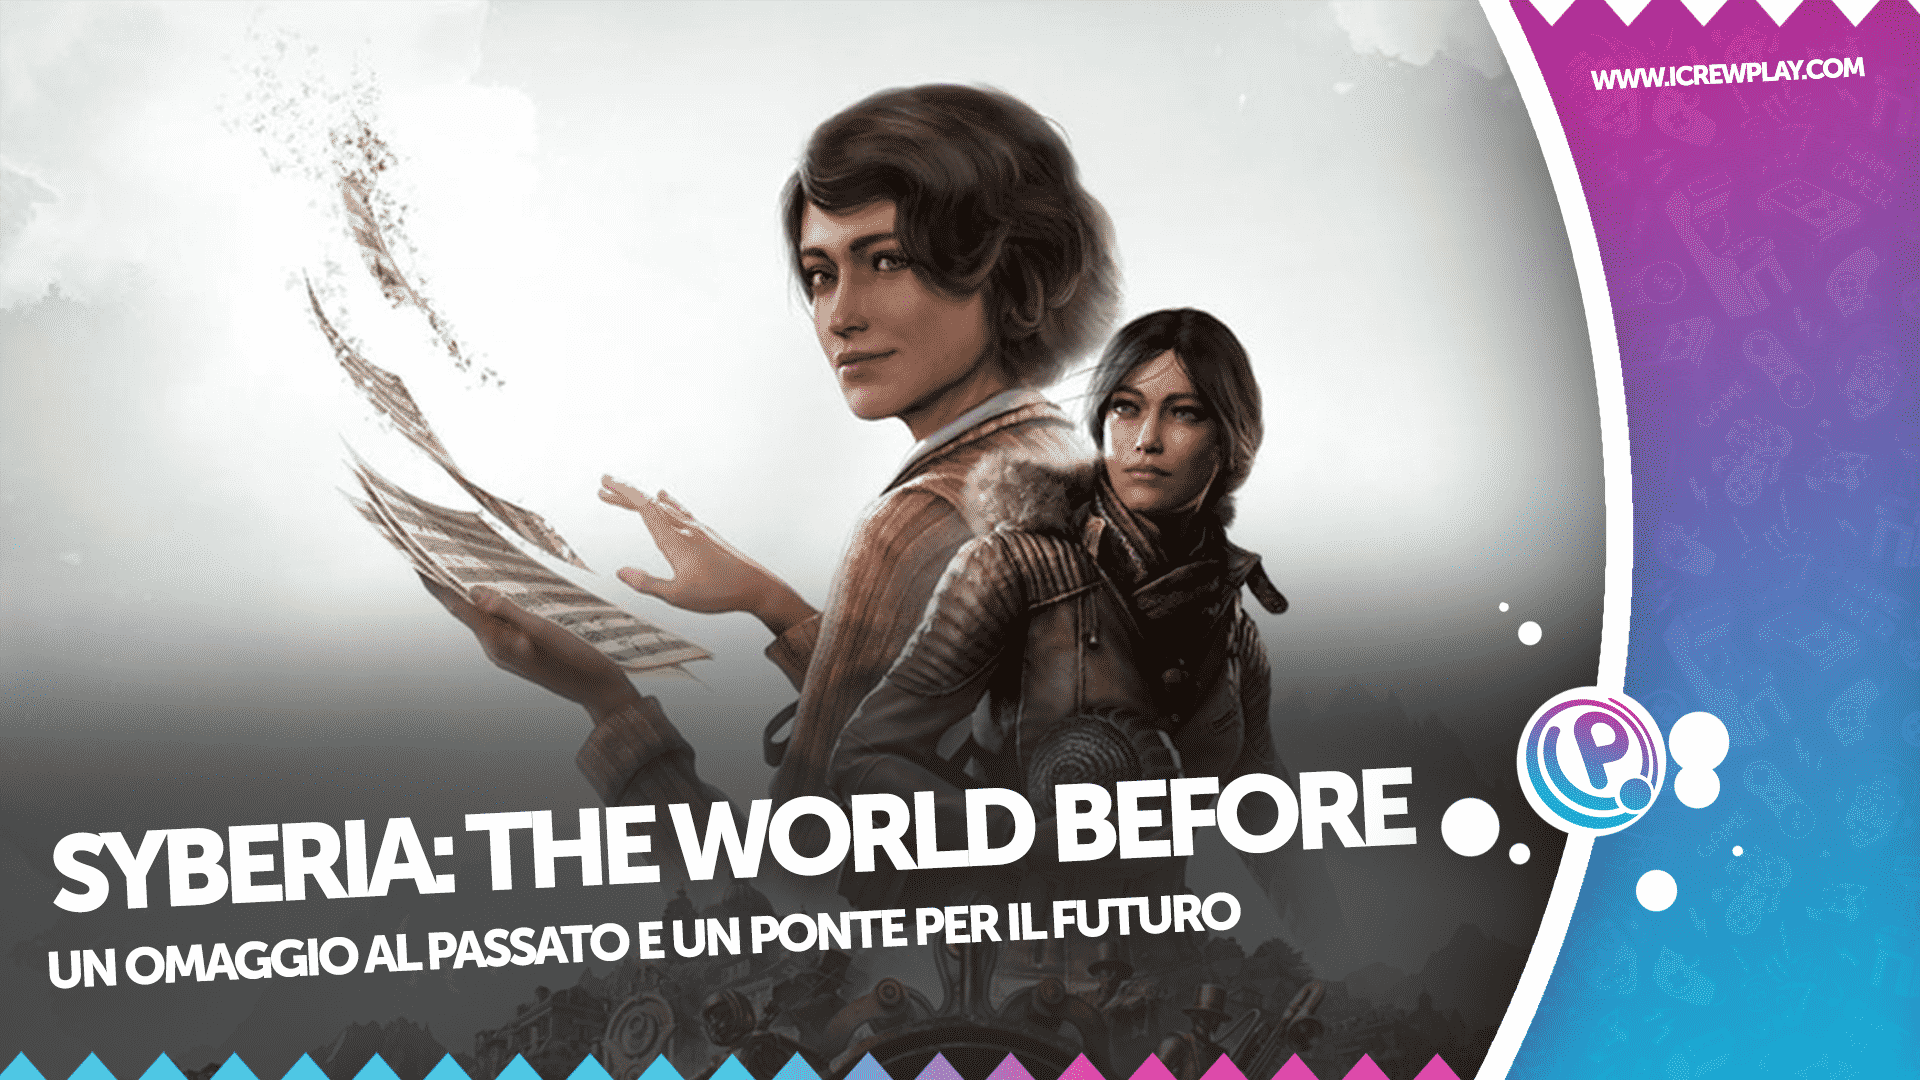 syberia: the world before